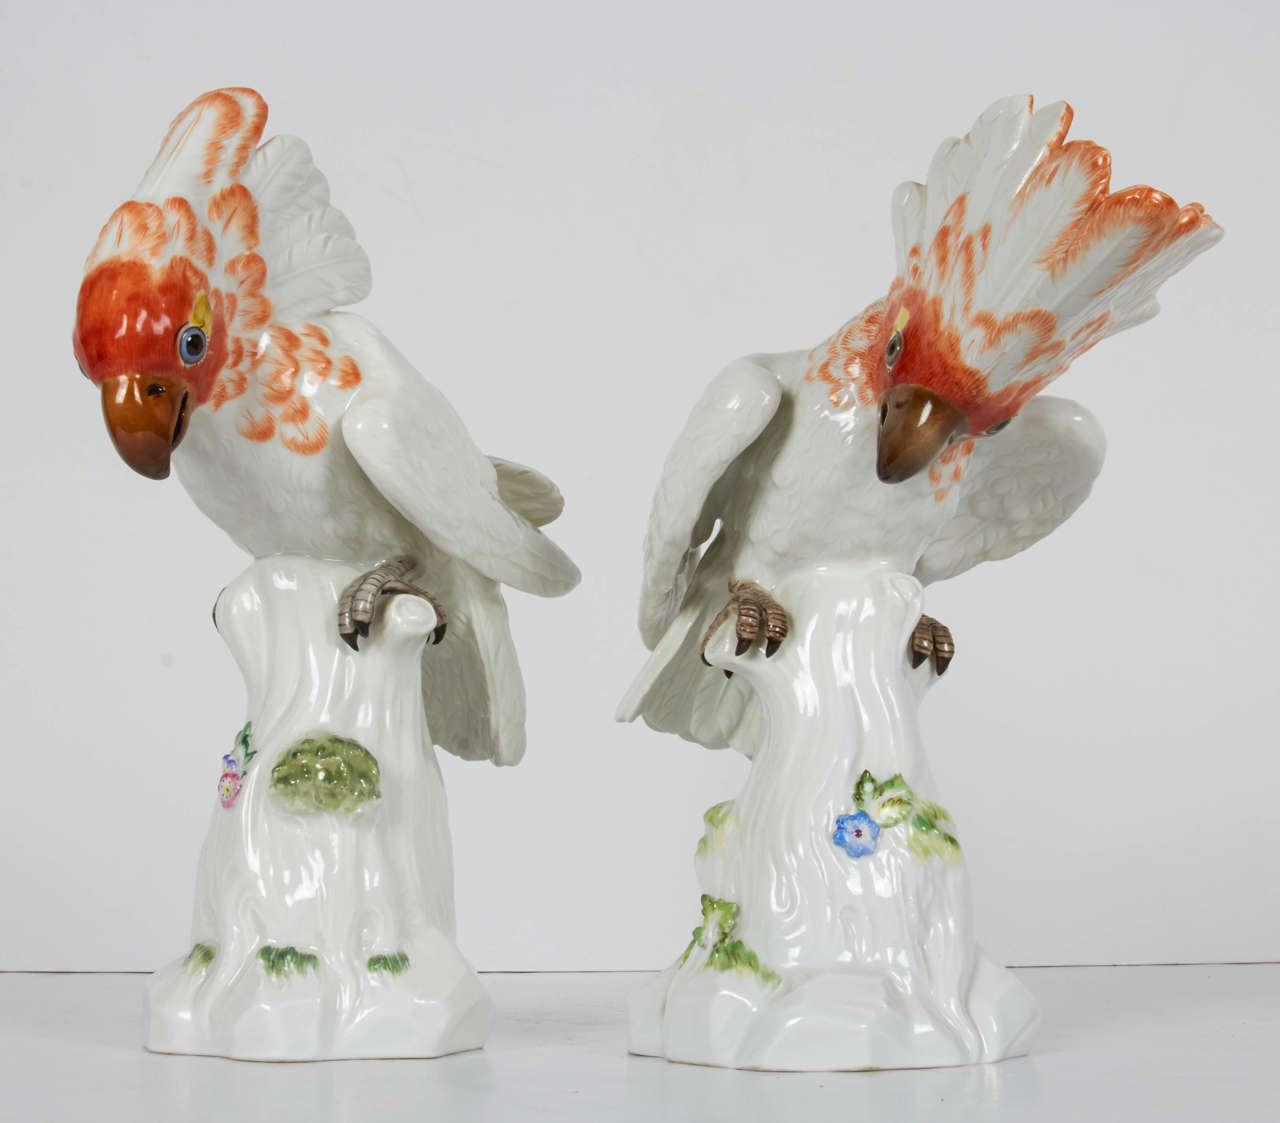 This fine pair of Meissen Porcelain figures of cockatoos / birds with orange feathers flared up, are perched on a tree with green leaves and small fine flowers. The cockatoos have very realistic features and colors. This original pair of porcelain